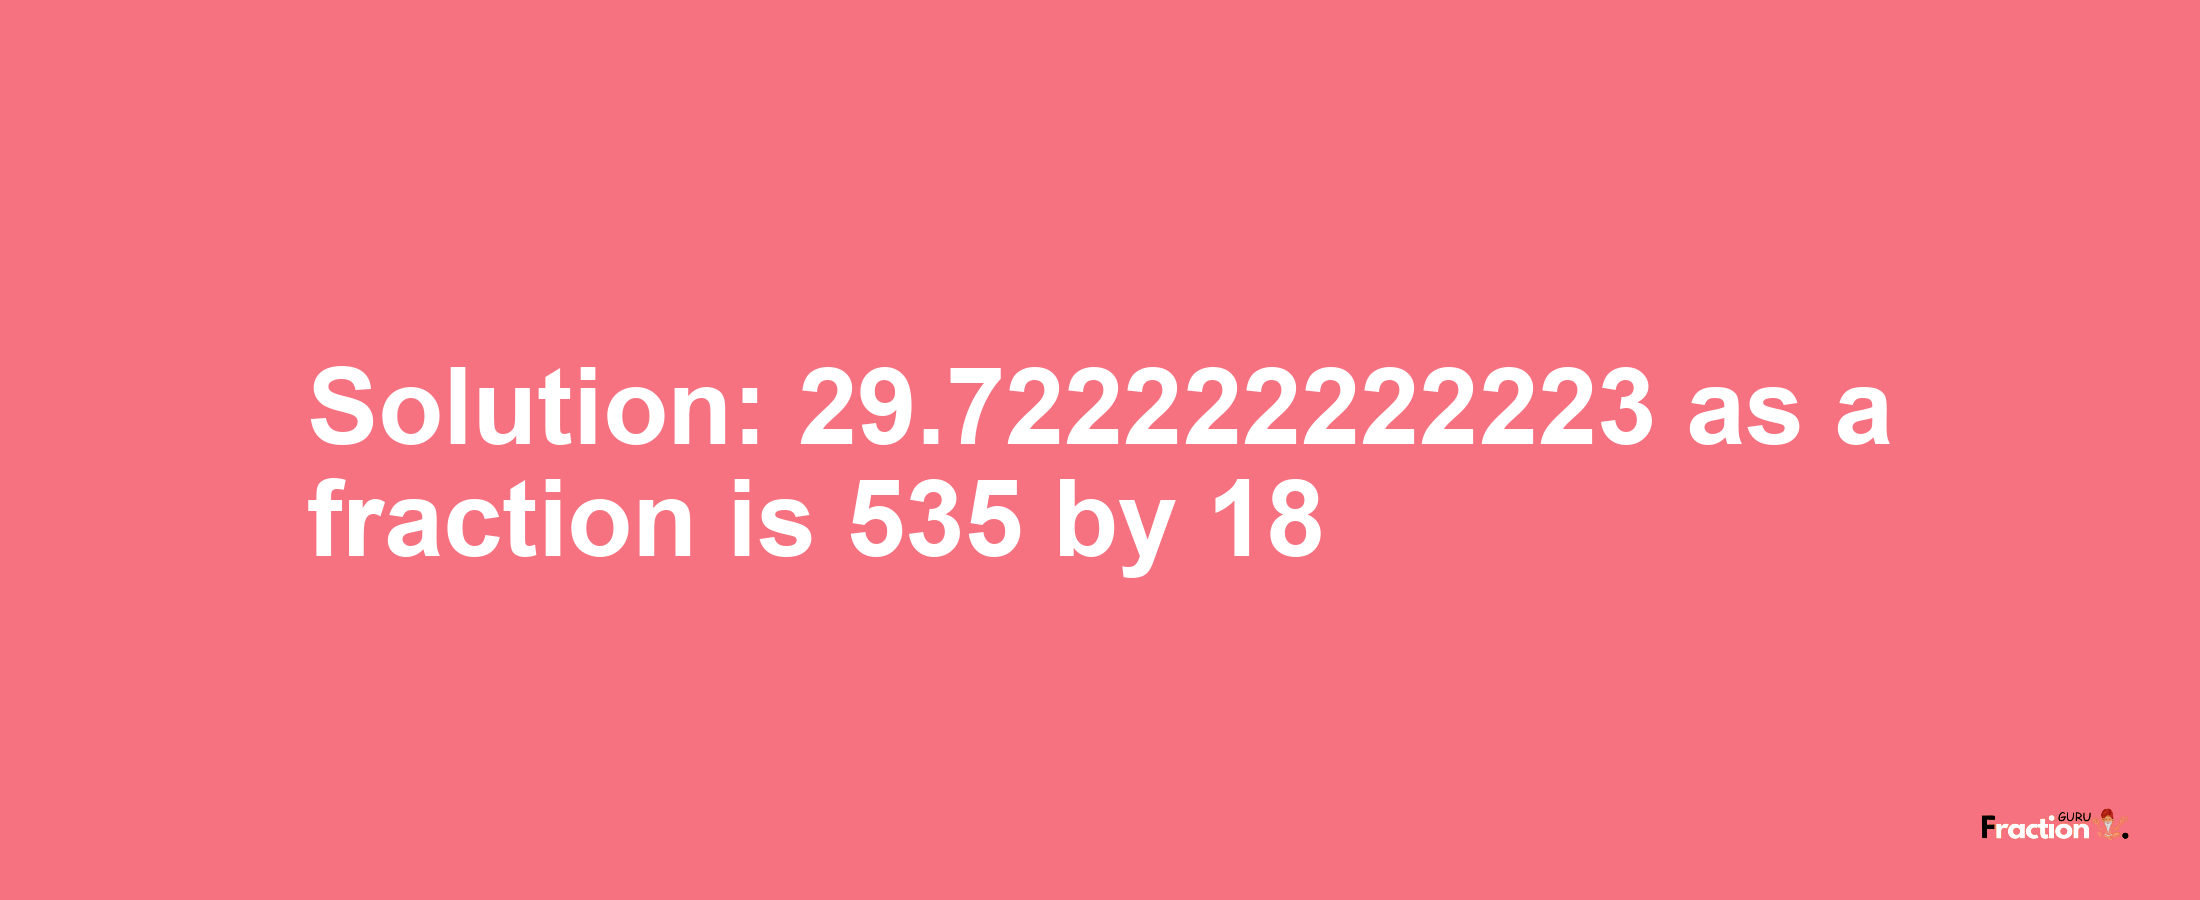 Solution:29.722222222223 as a fraction is 535/18